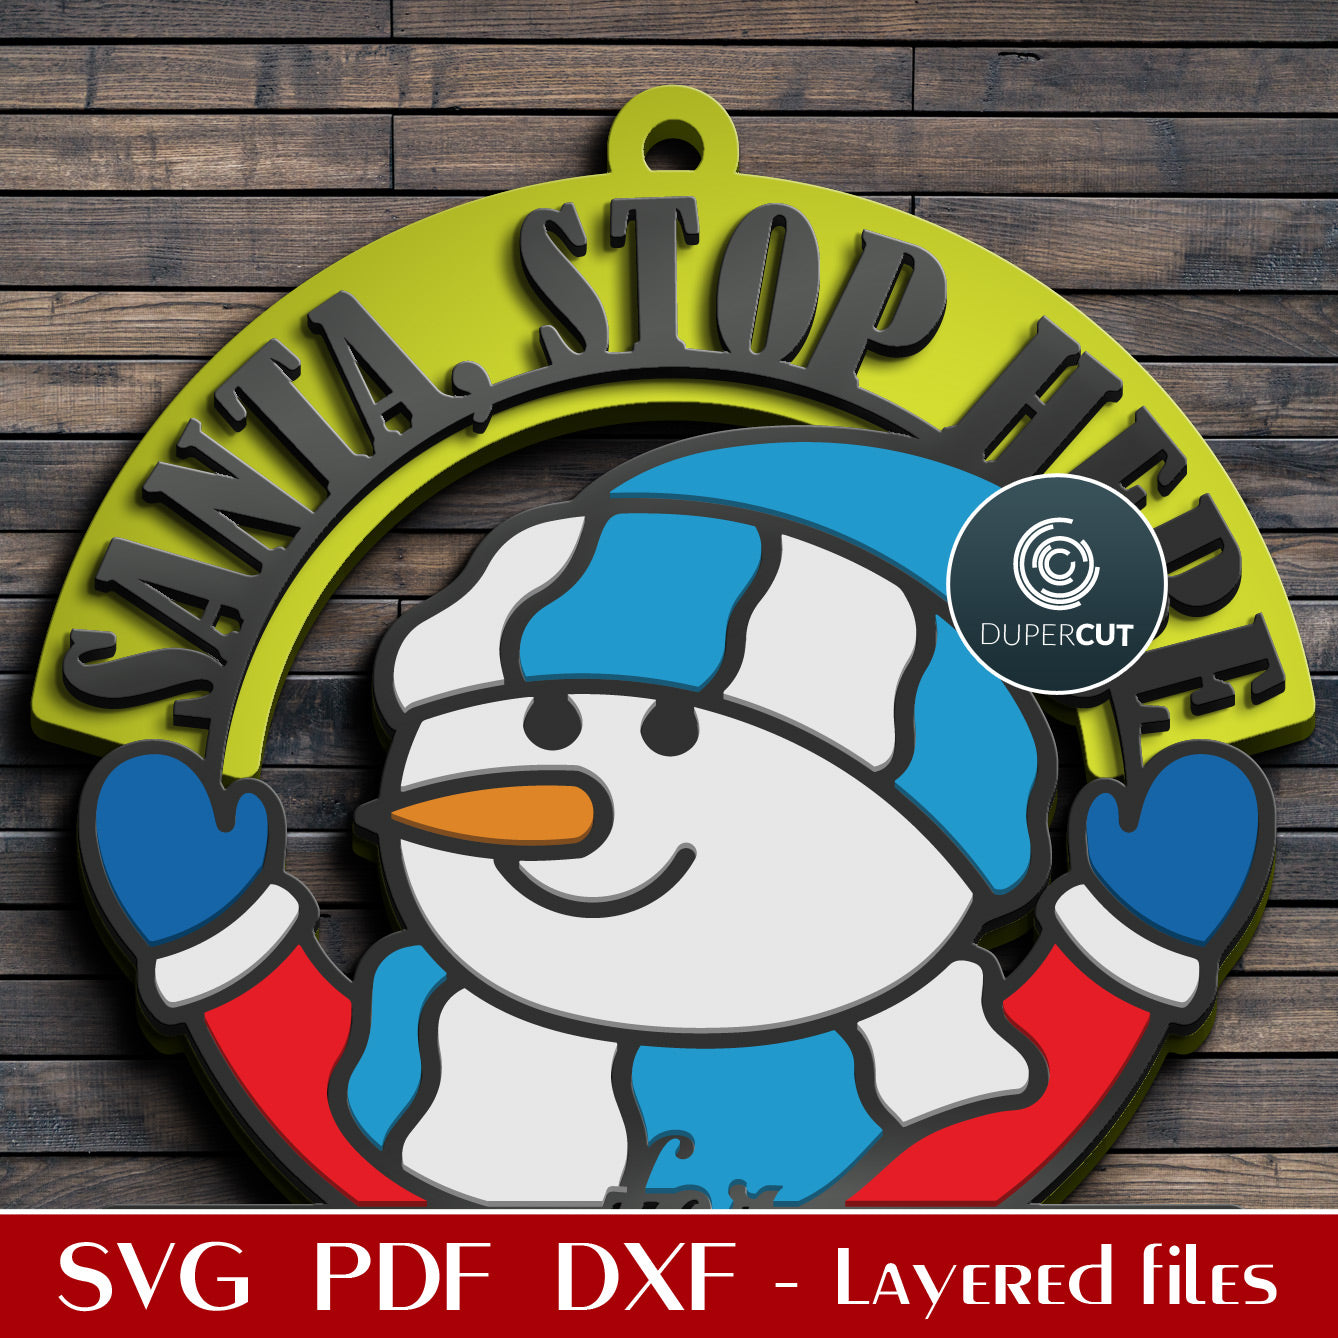 Santa, please stop here, Christmas door hanger,  add child's name, SVG DXF vector layered cutting files for Glowforge, Cricut, Silhouette, CNC laser machines by DuperCut